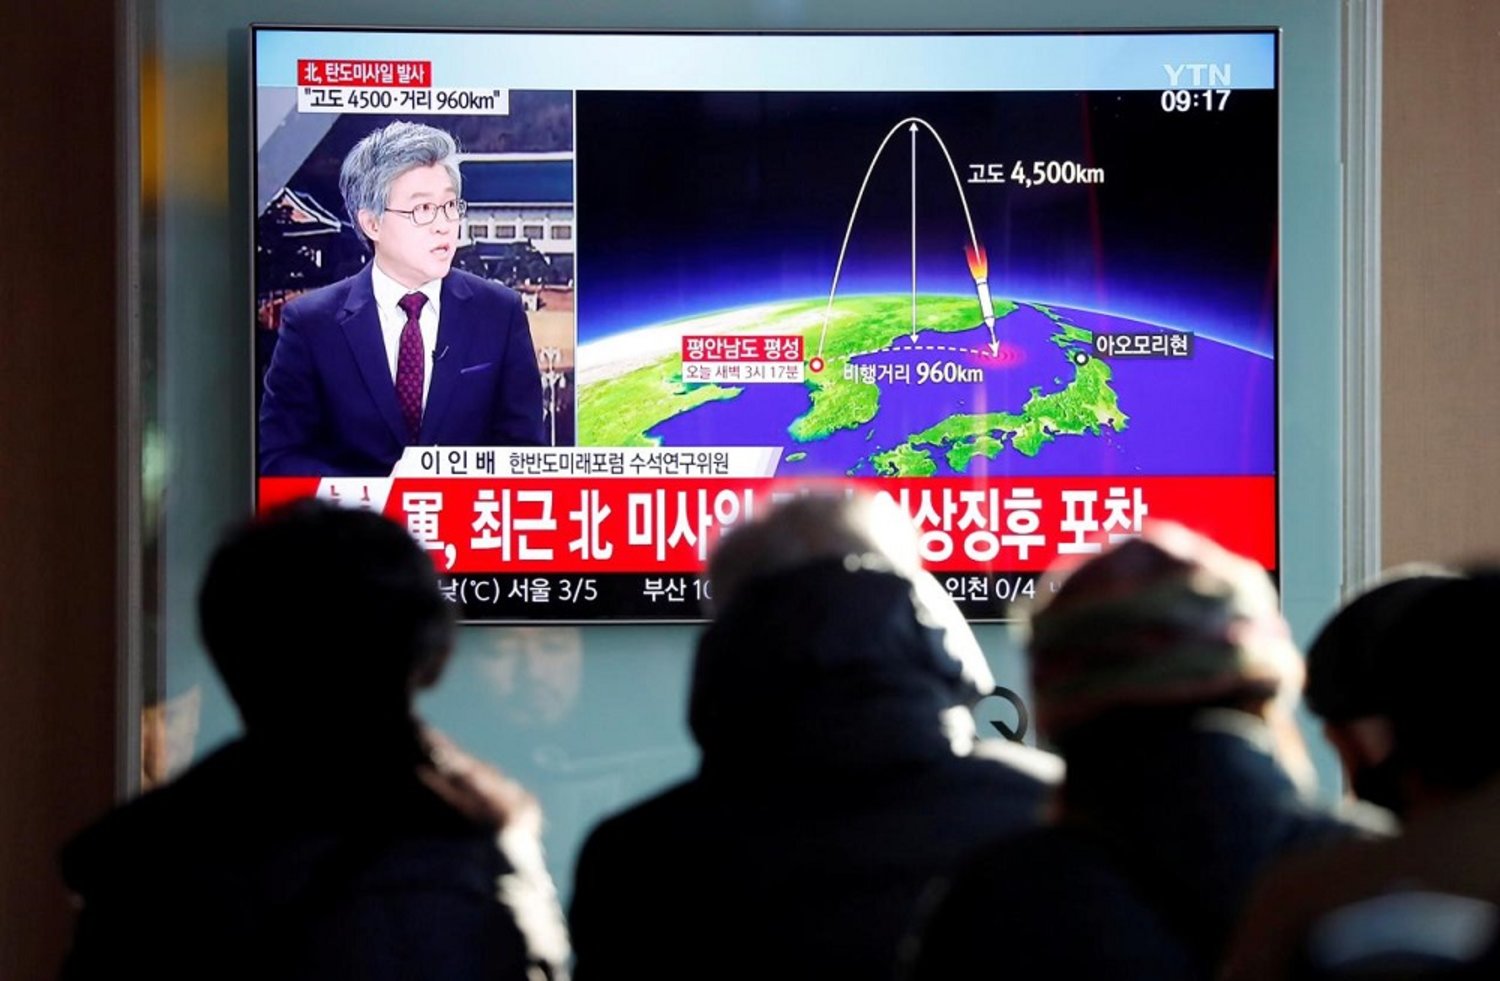 People watch a television broadcast of a news report on North Korea firing what appeared to be an intercontinental ballistic missile that landed close to Japan, in Seoul, South Korea. (Reuters)